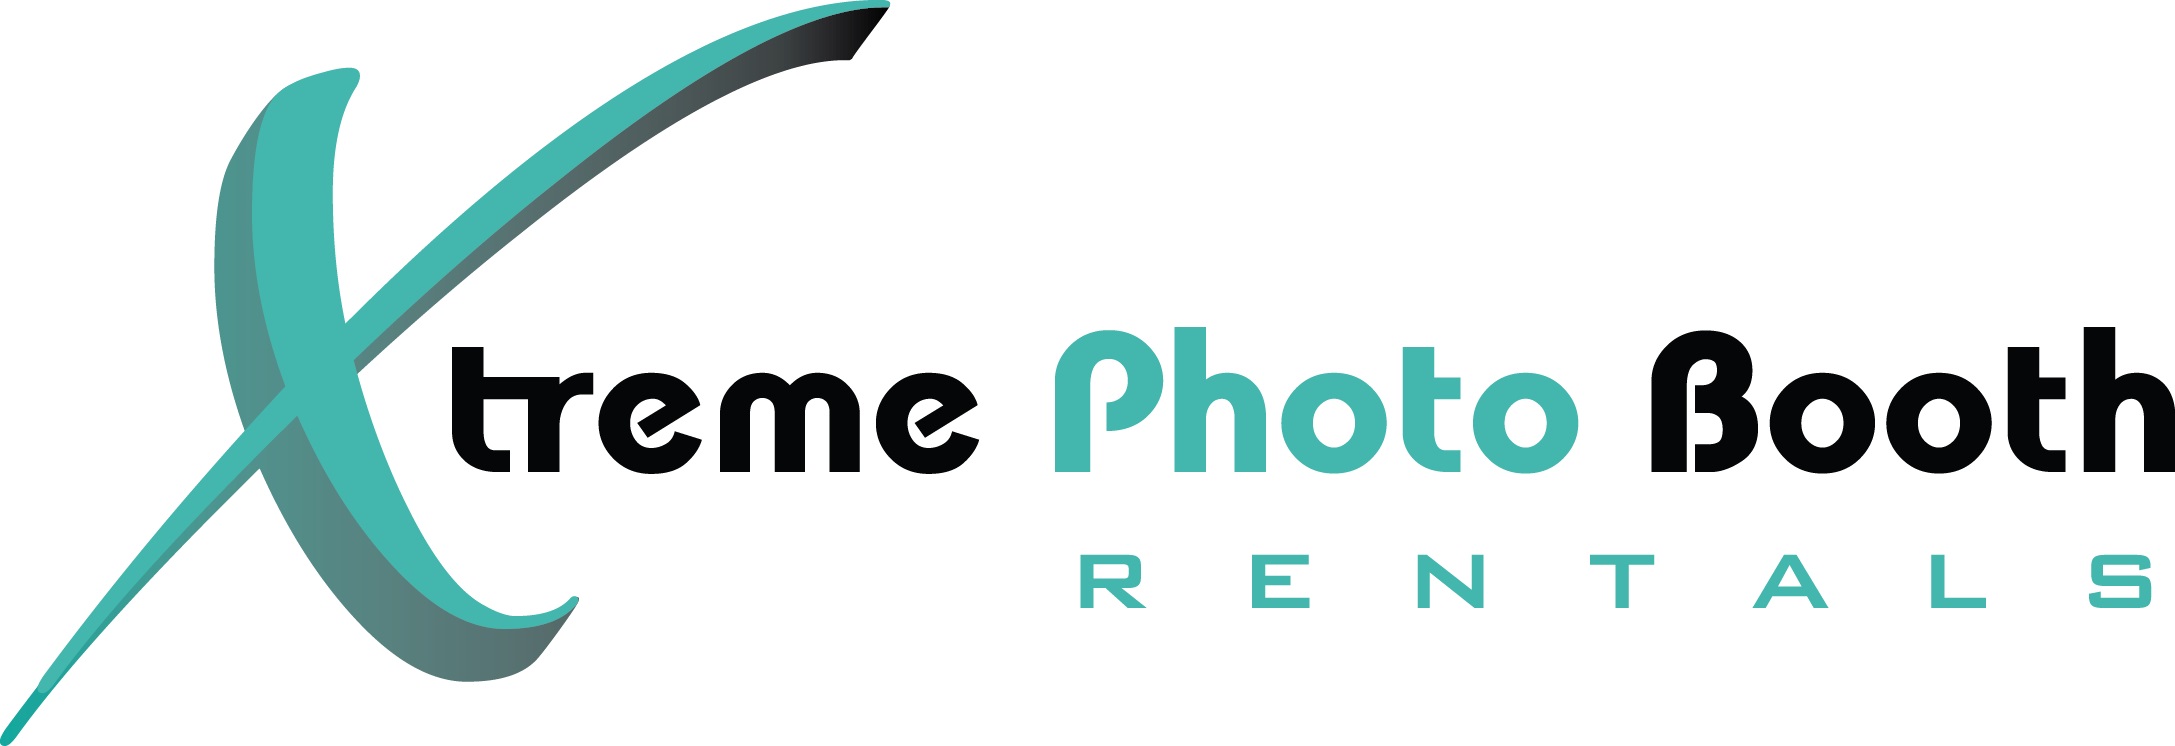 Xtreme Photo Booth Rentals